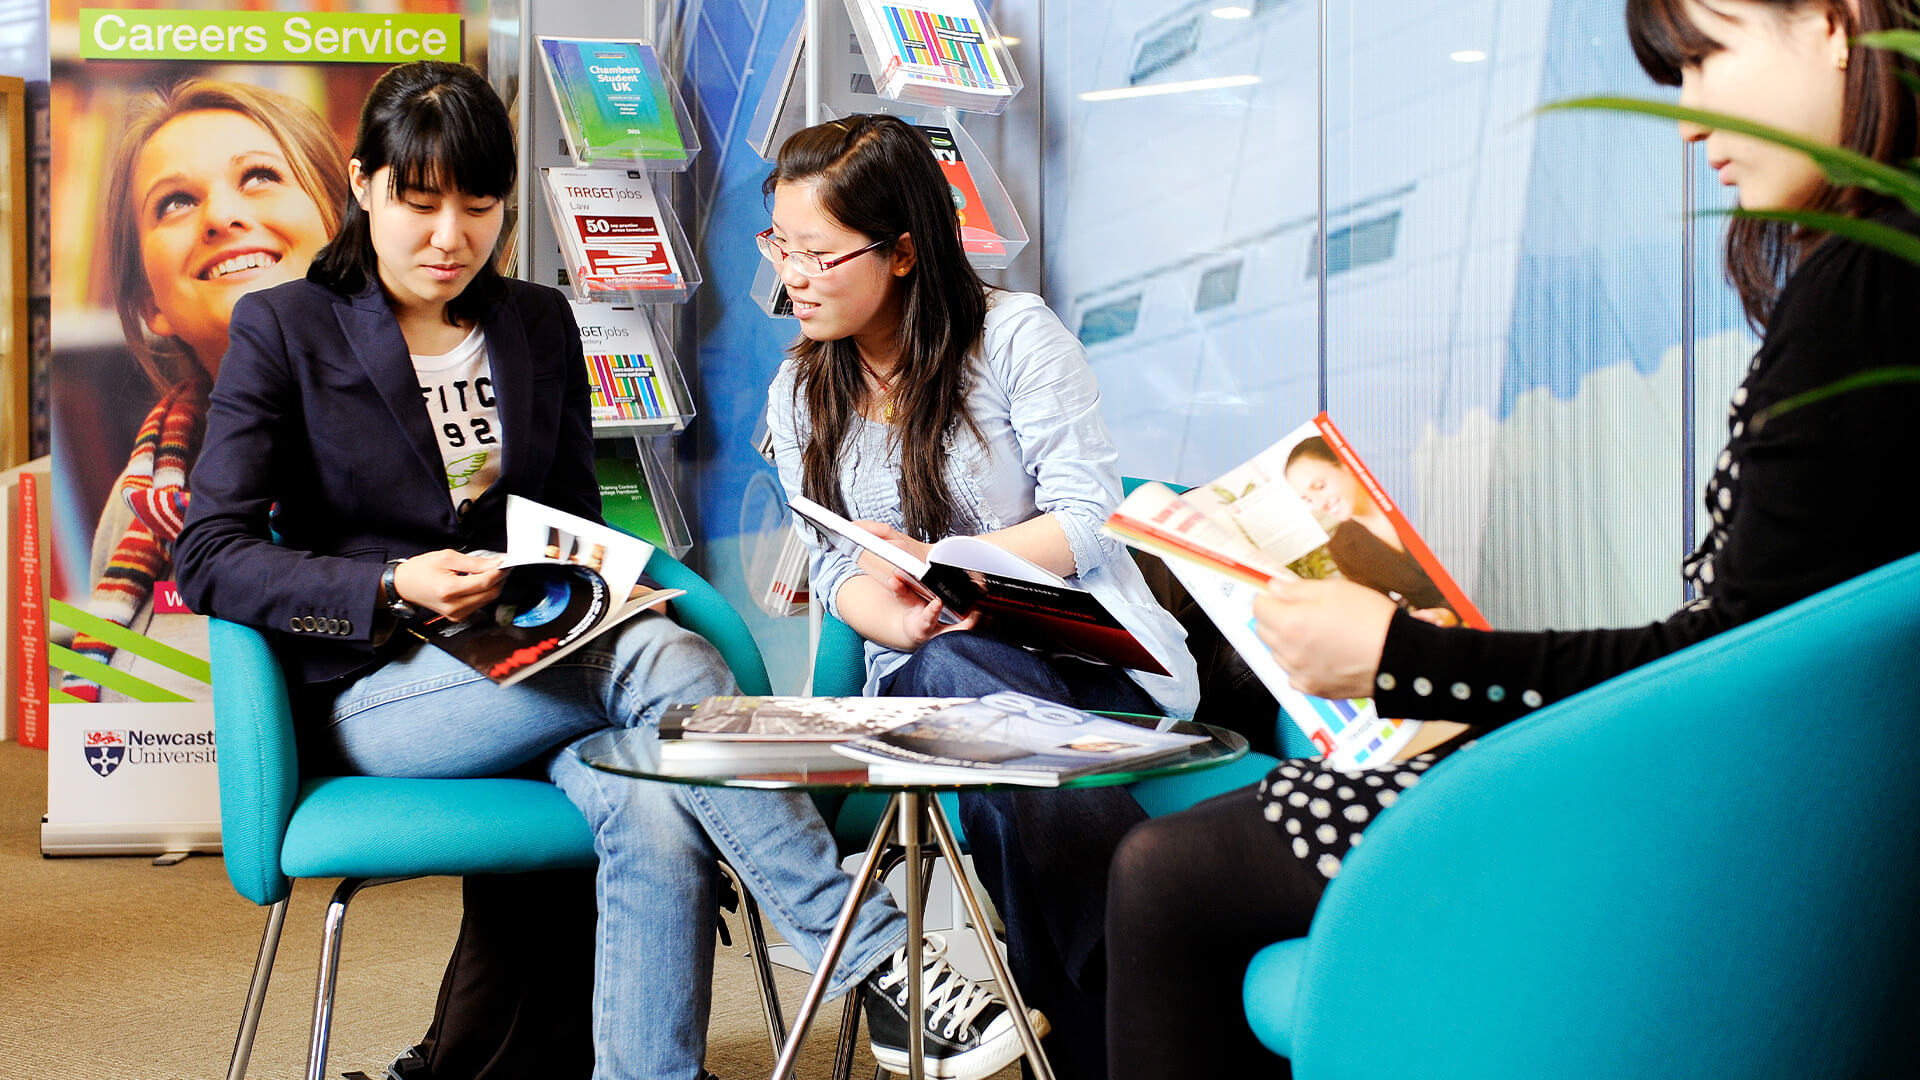 Students socialising and looking through publications in a breakout area on Newcastle University campus